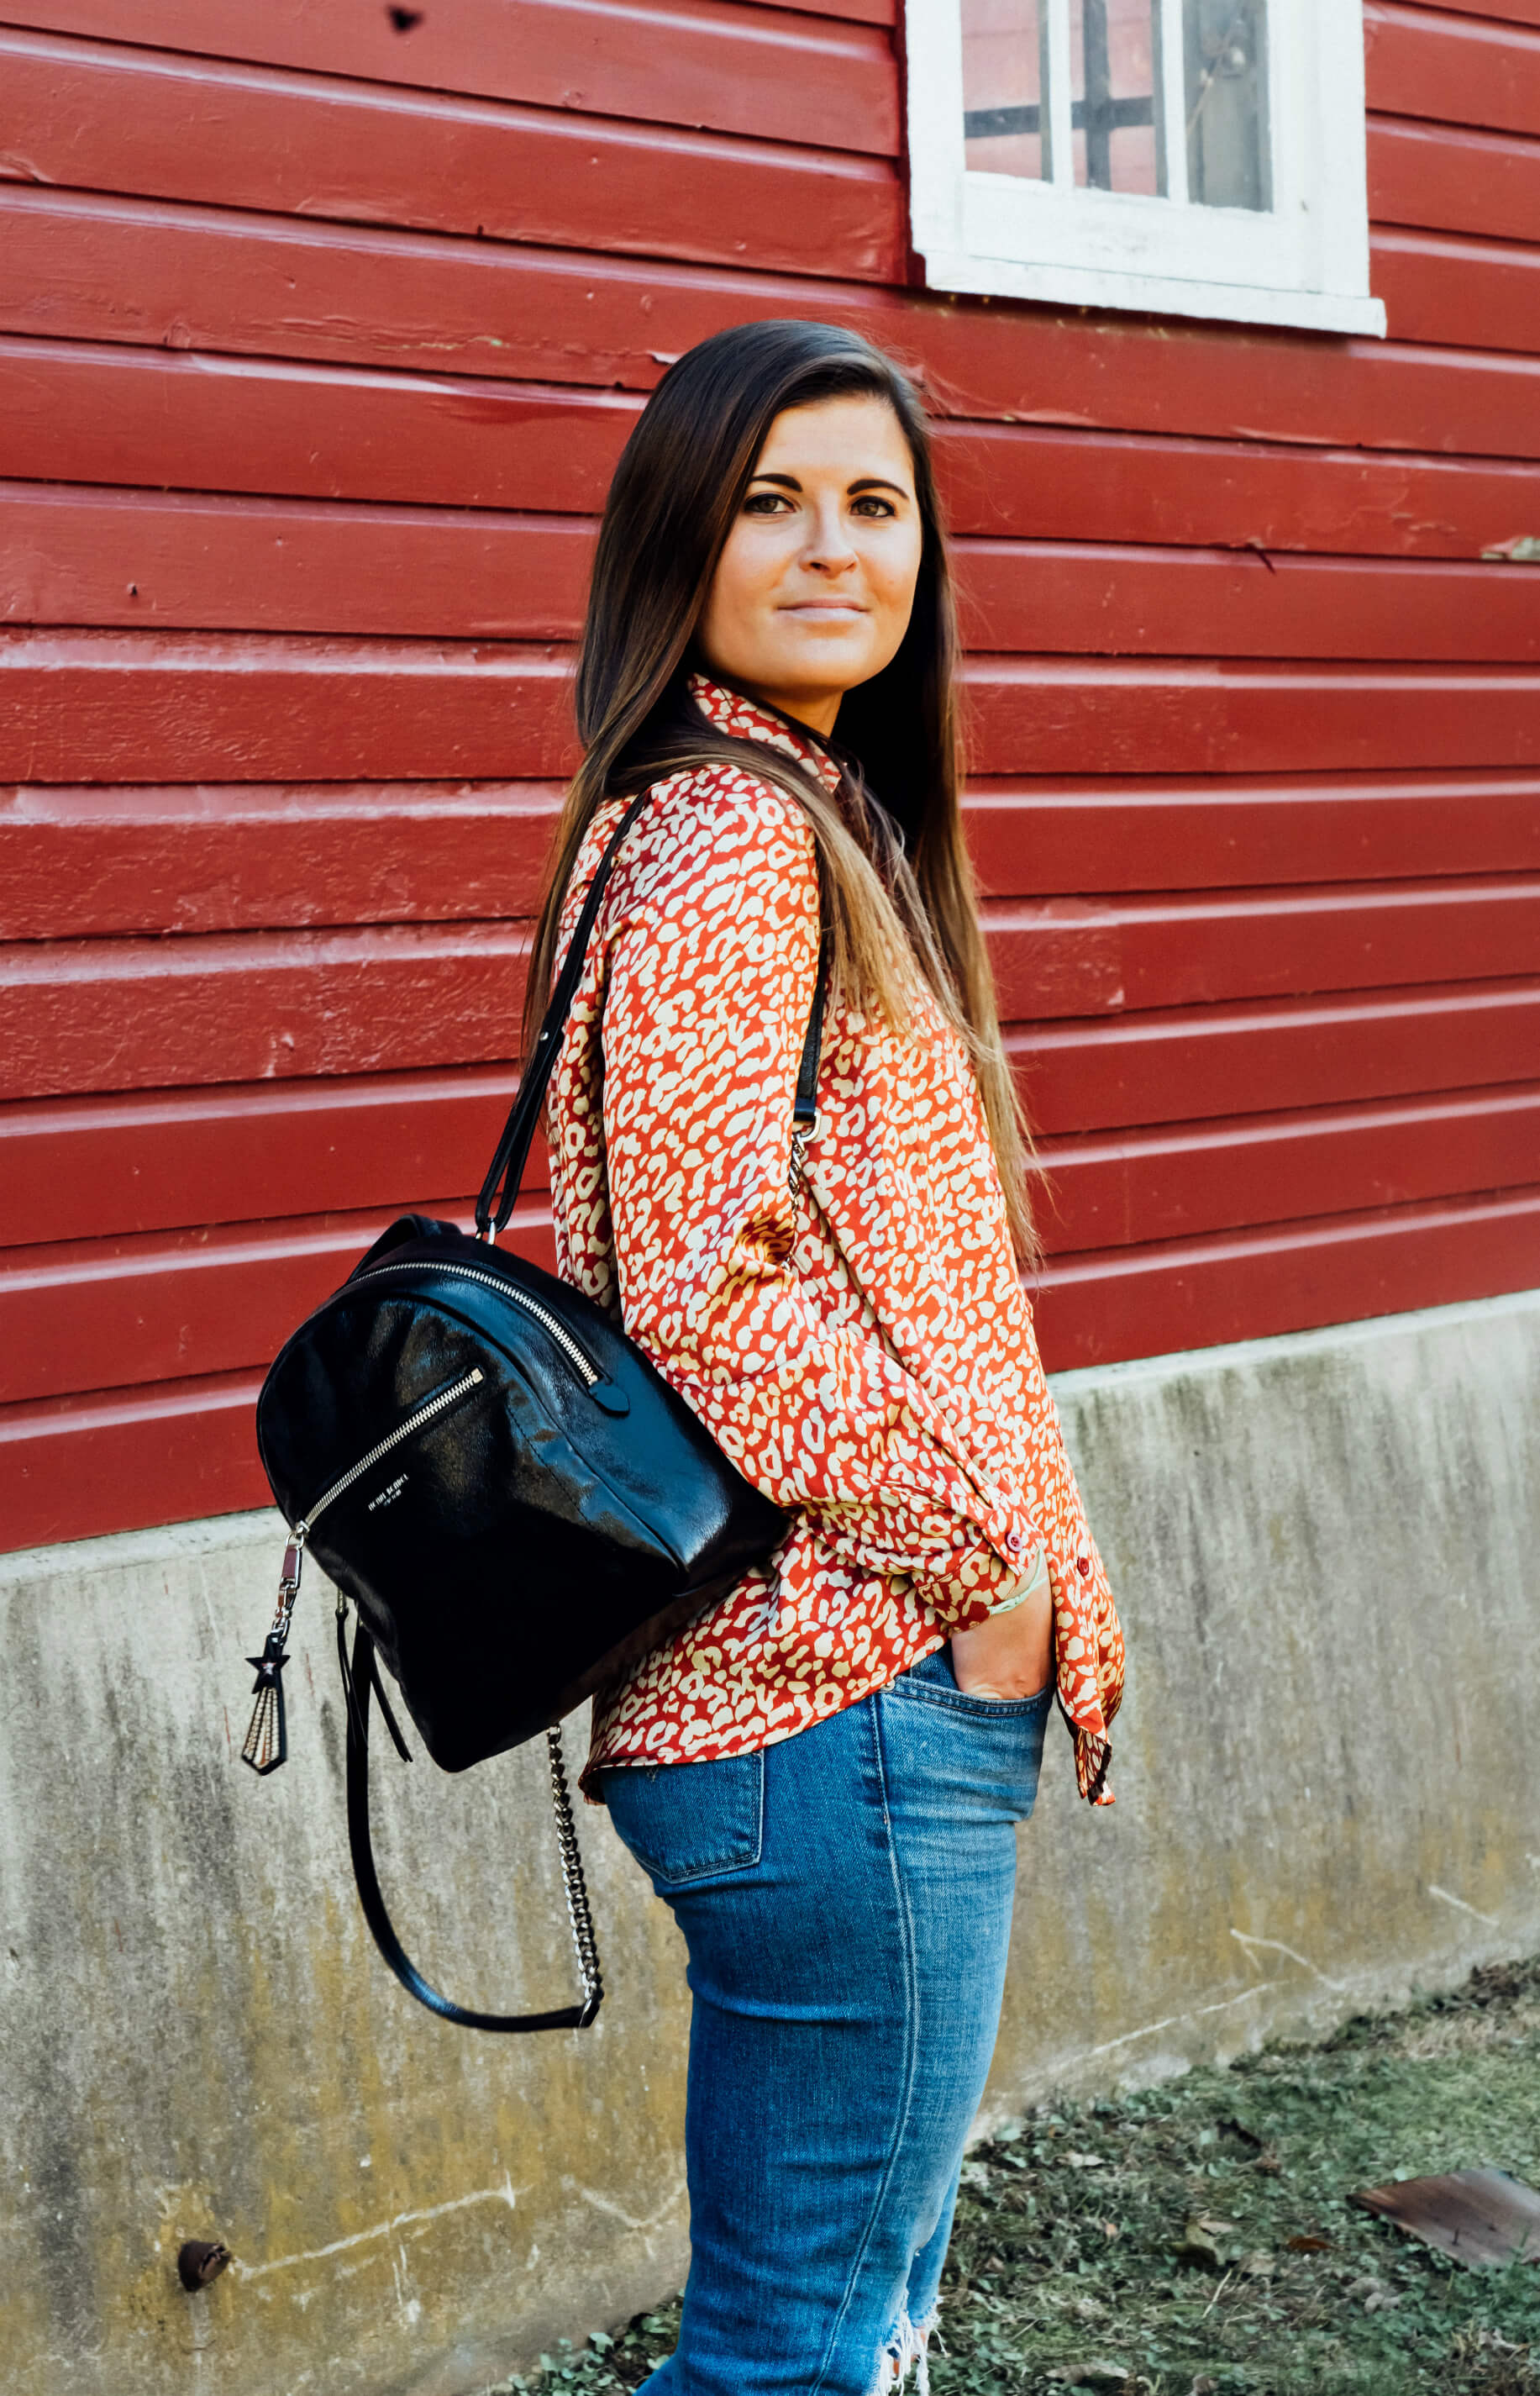 Boohoo Leopard Print Woven Oversized Shirt, Henri Bendel About Town Shimmer Backpack, Fall Outfit, Tilden of To Be Bright